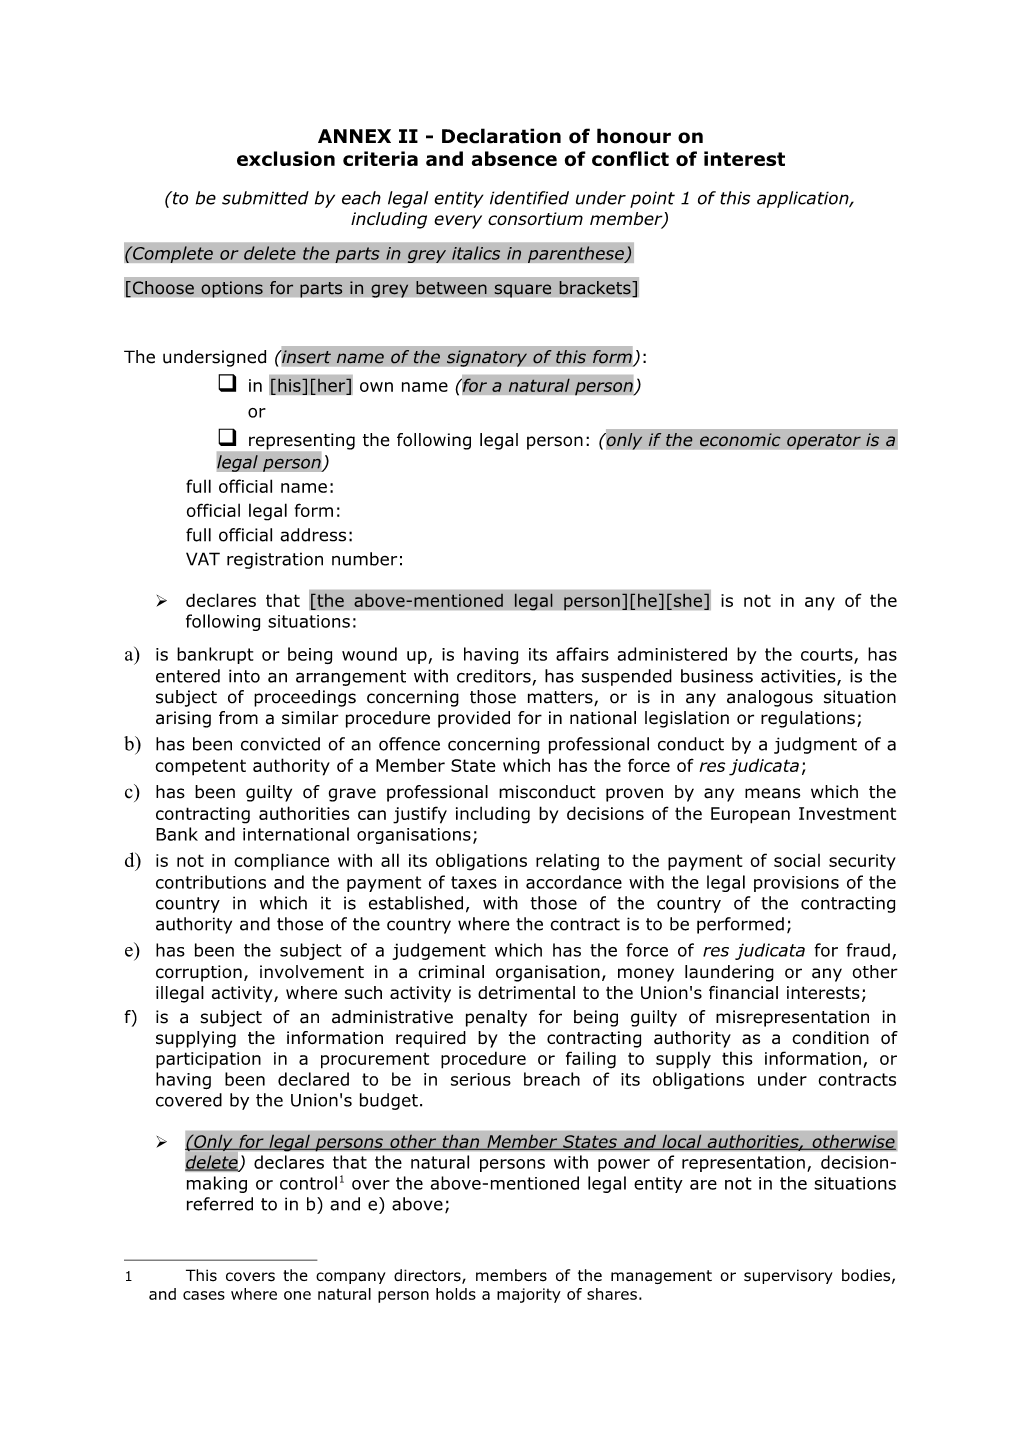 ANNEX II - Declaration of Honour Onexclusion Criteria and Absence of Conflict of Interest